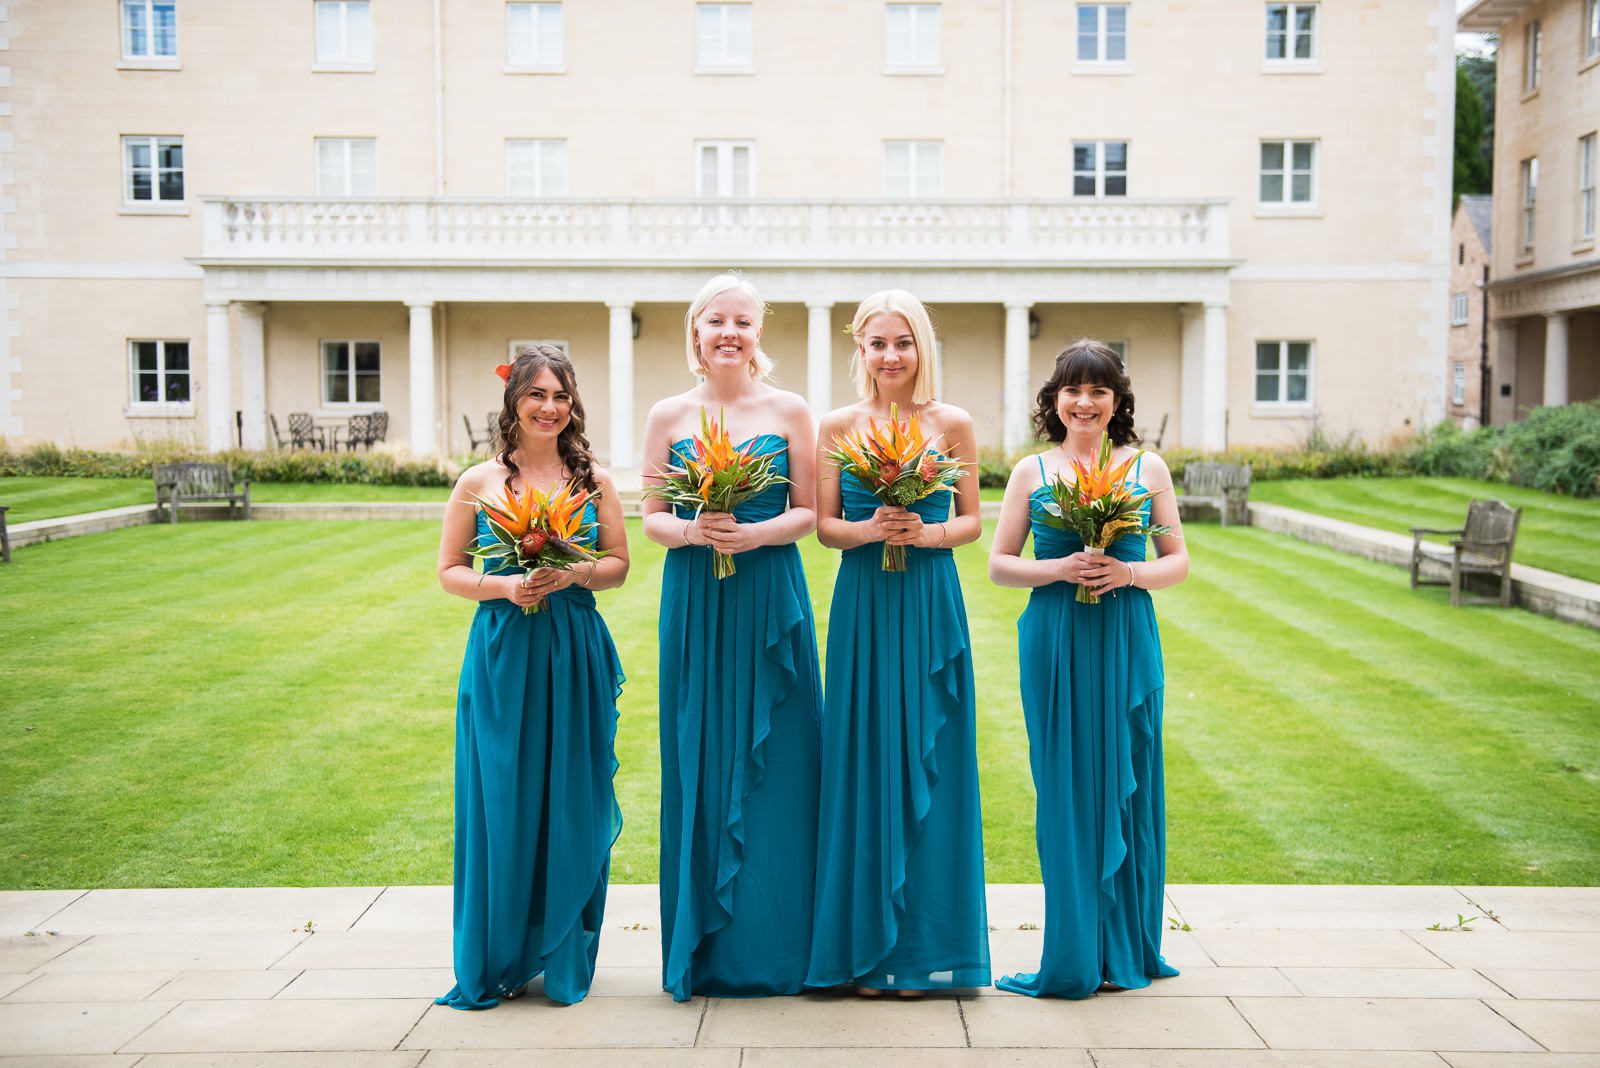 Getting Married At Downing College